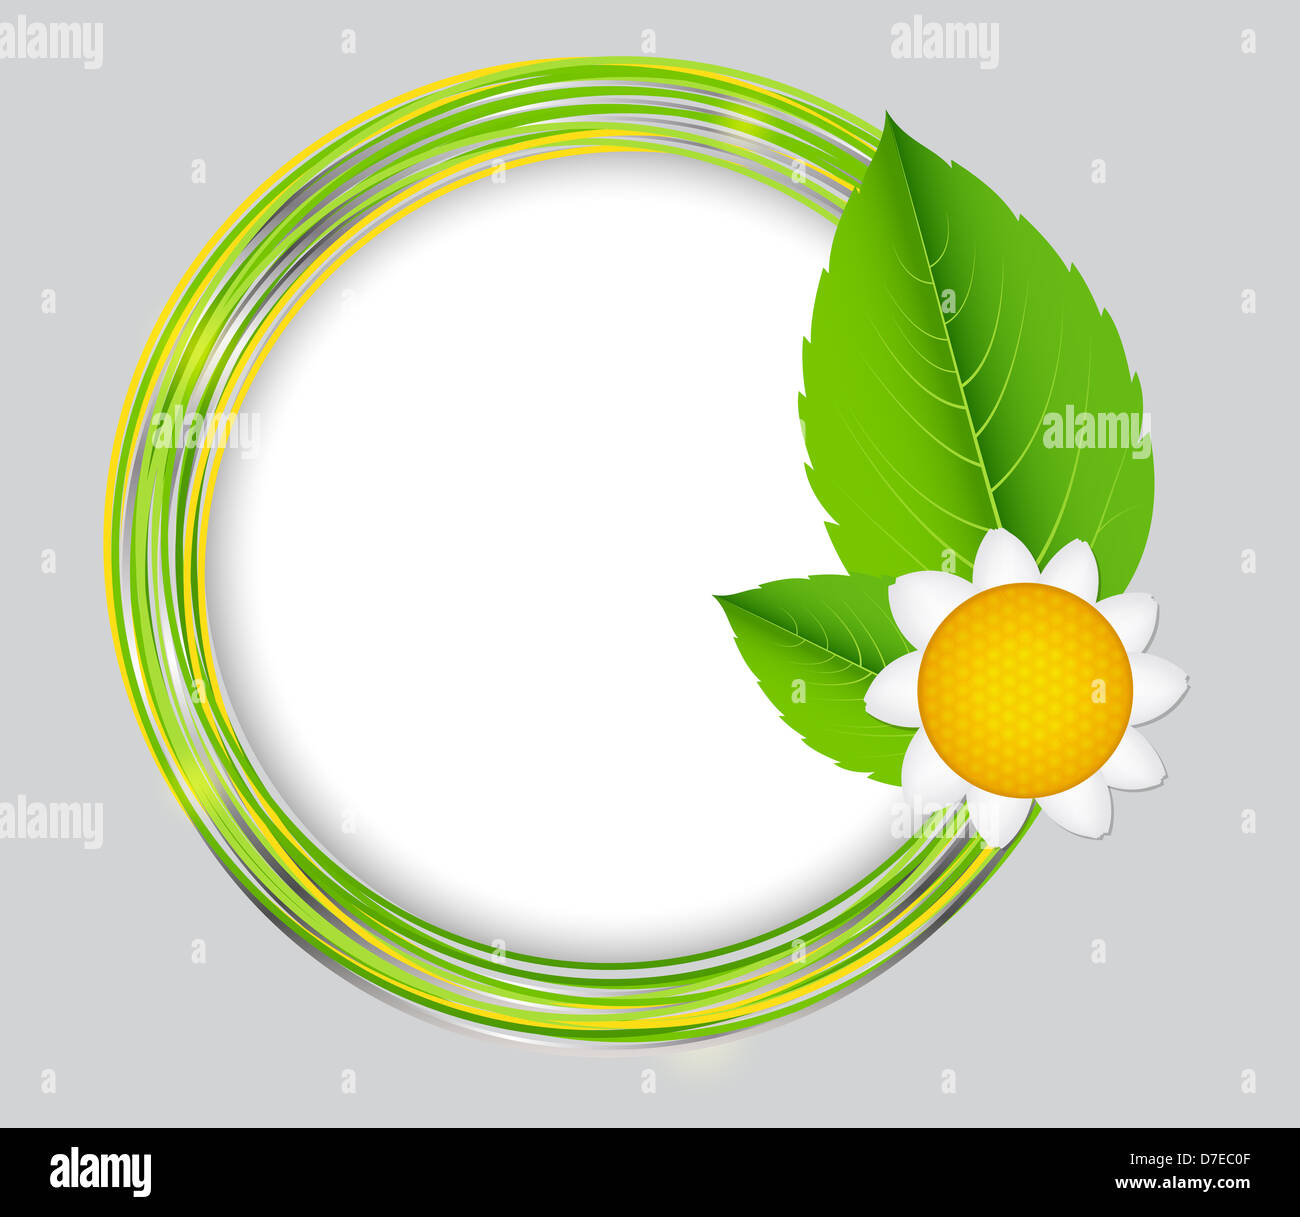 Abstract background with frame and flowers. Vector illustration. Stock Photo